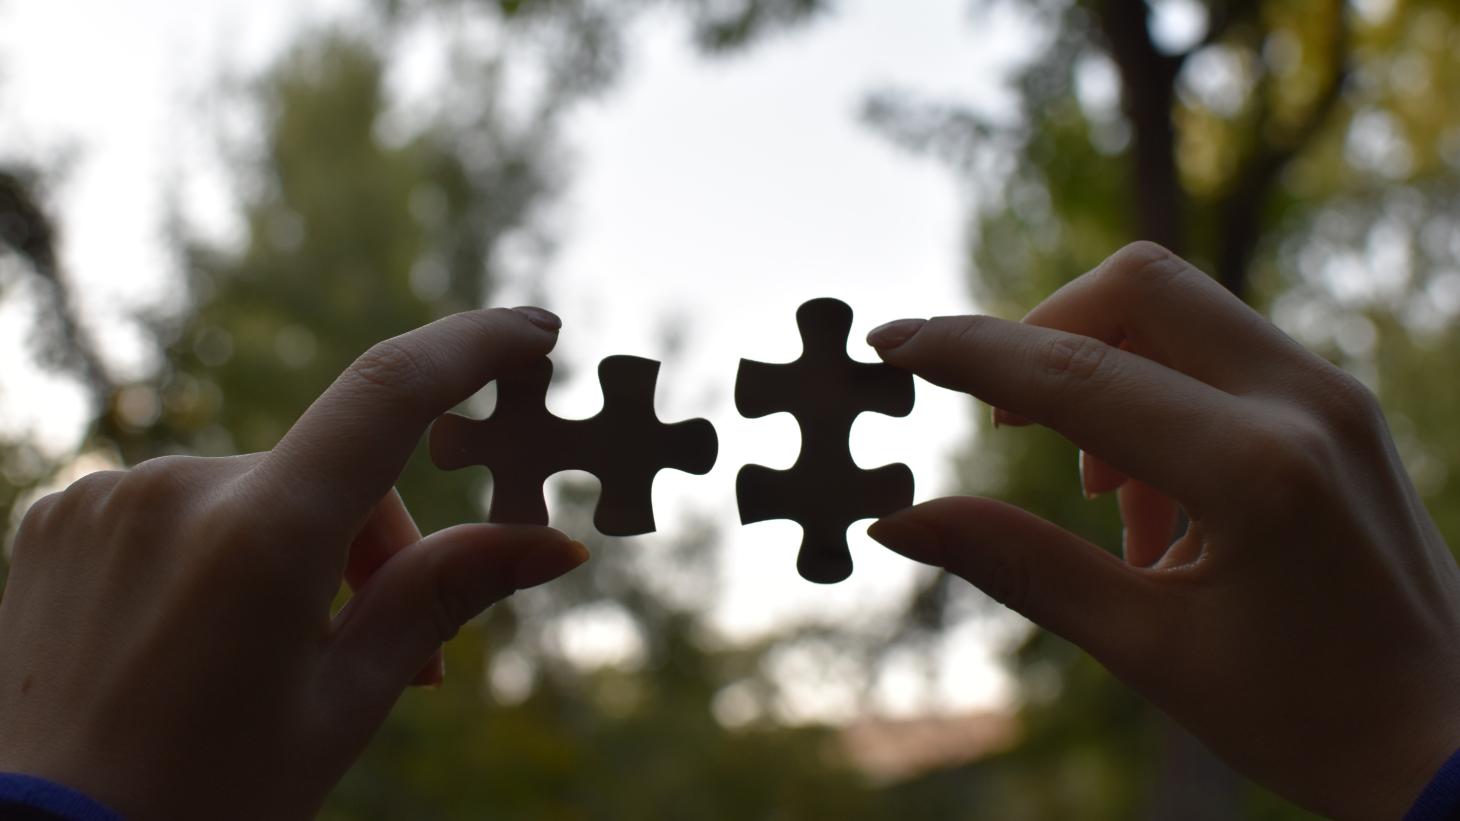 two hands holding up two jigsaw pieces that would fit together